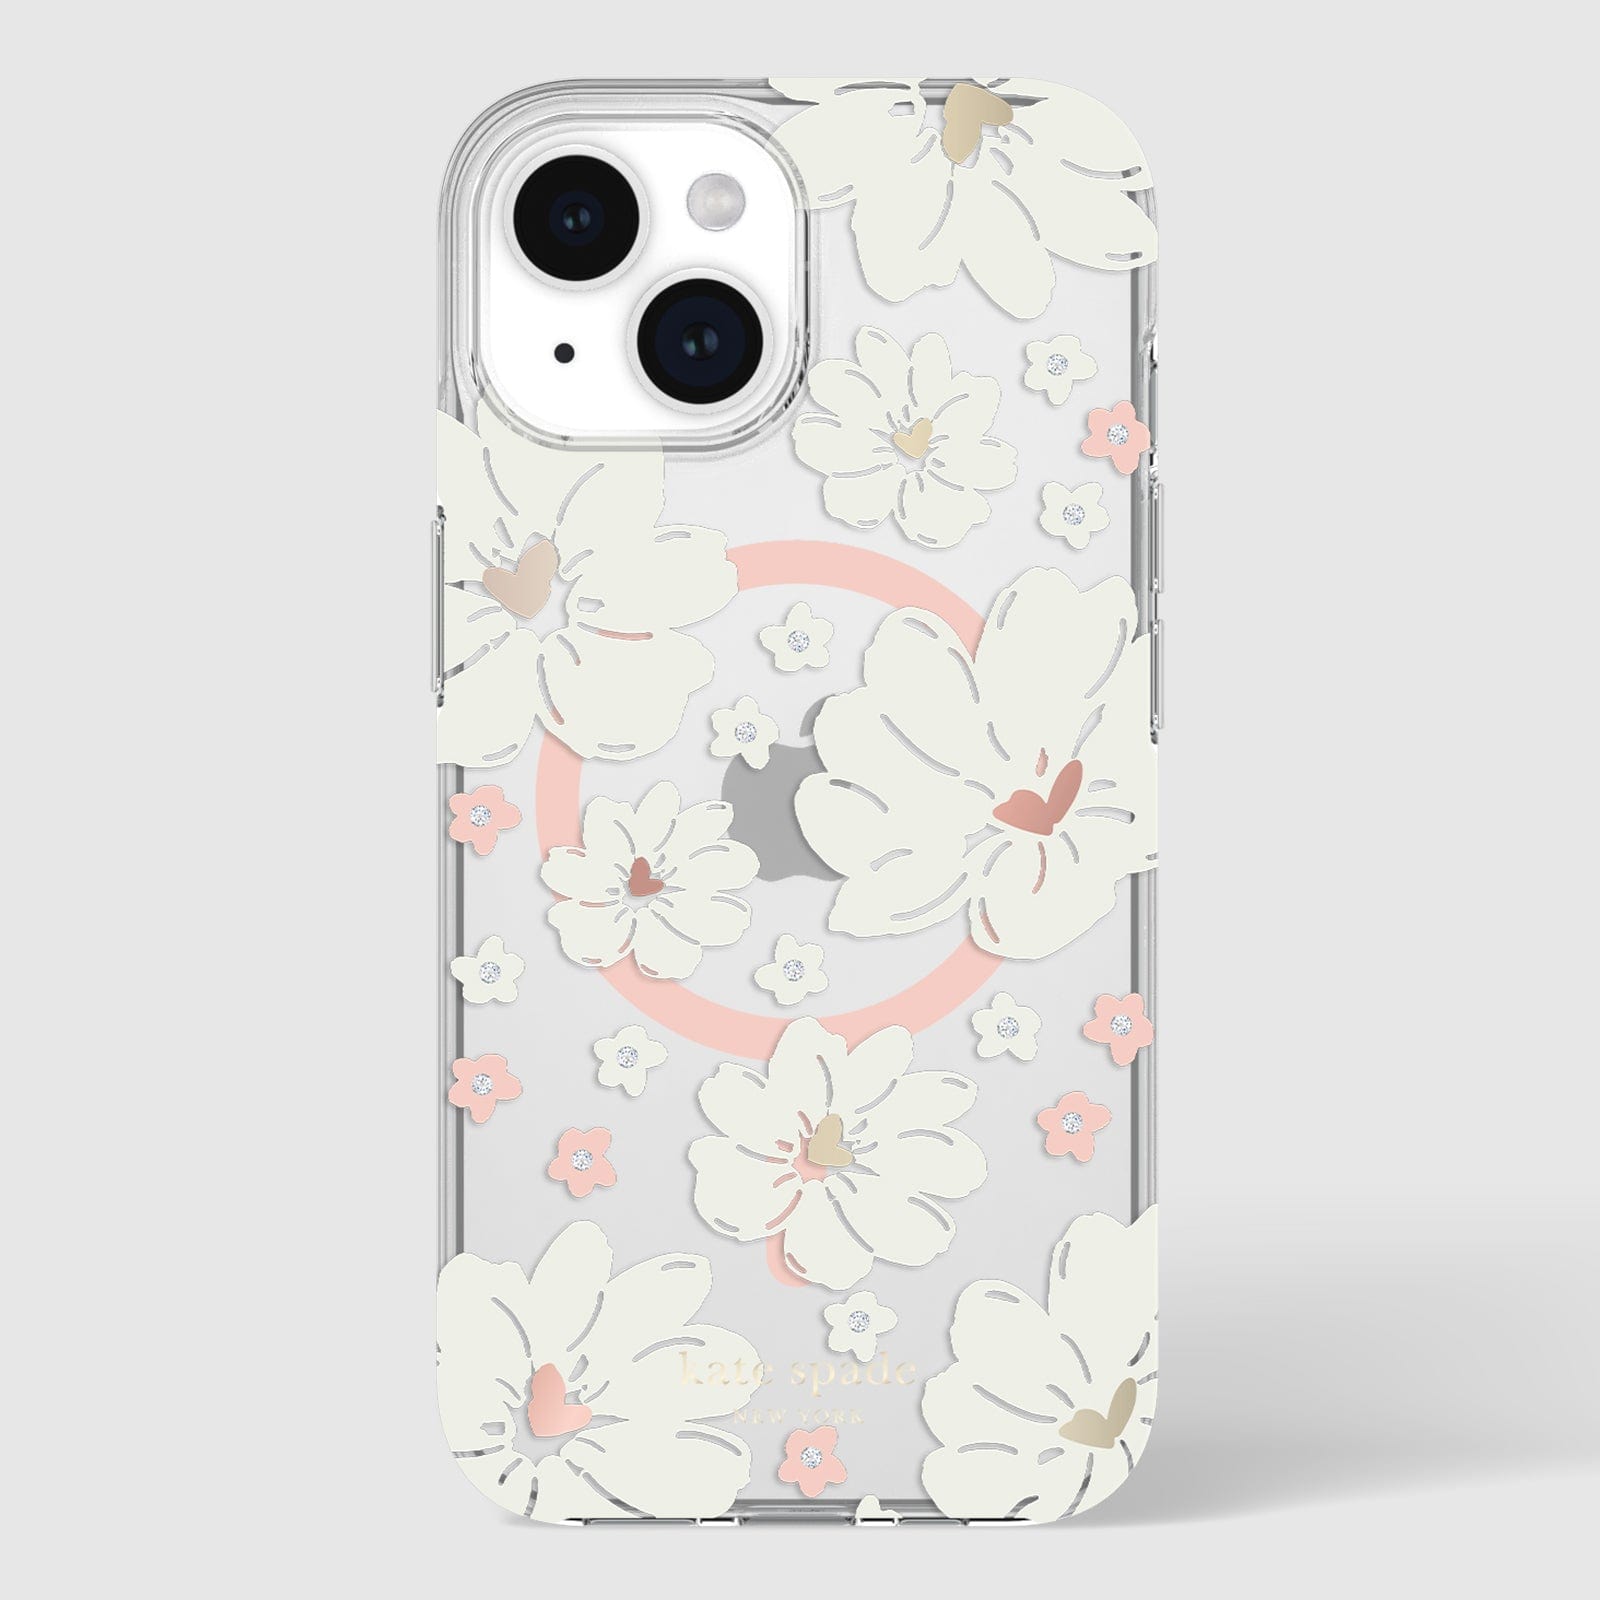 kate spade new york Flower Bed Printed iPhone 14 Pro Case